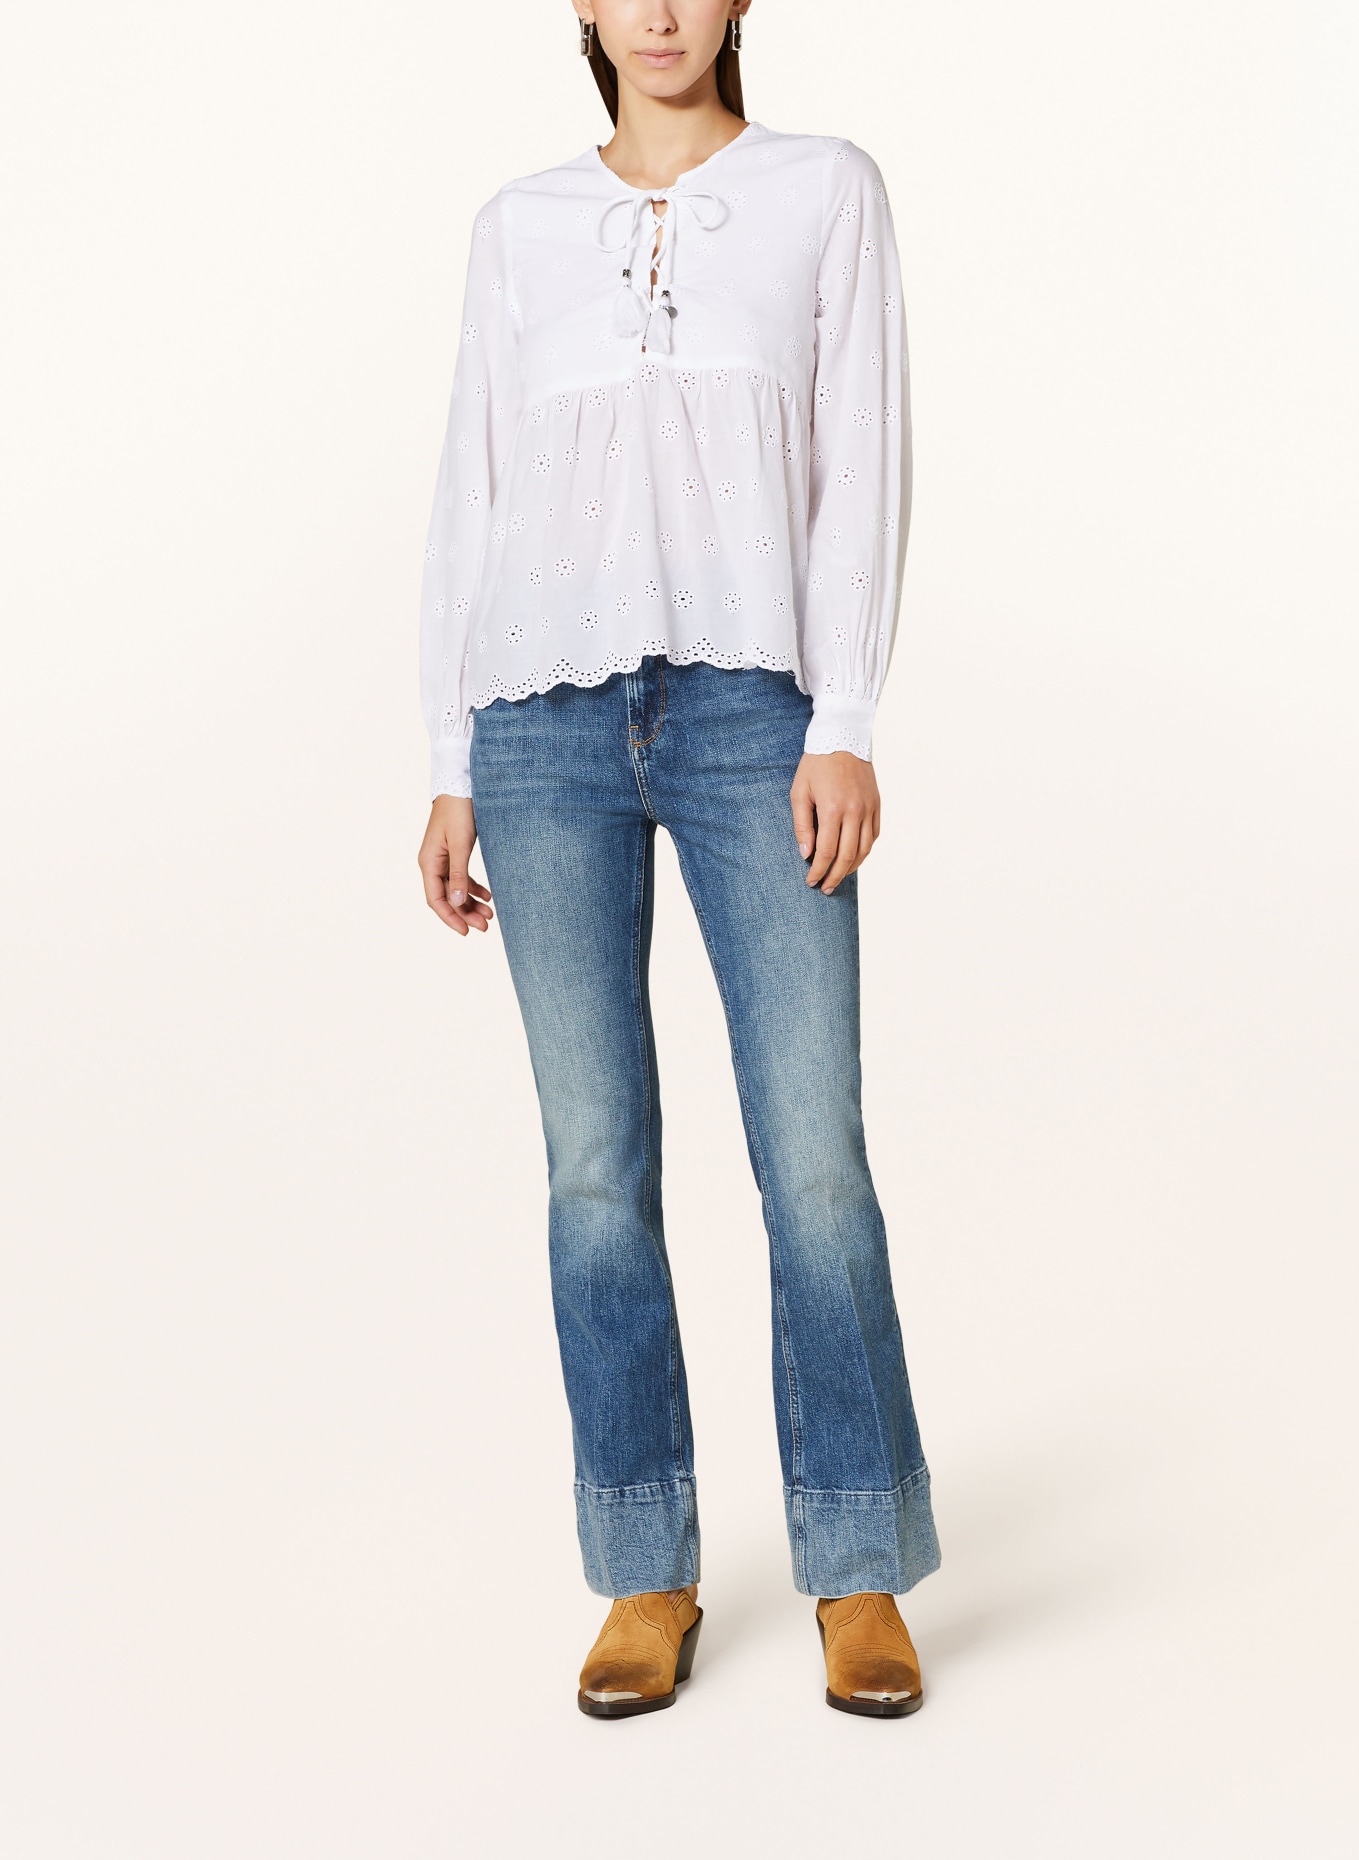 Pepe Jeans Shirt blouse DANAE with broderie anglaise and ruffles, Color: WHITE (Image 2)